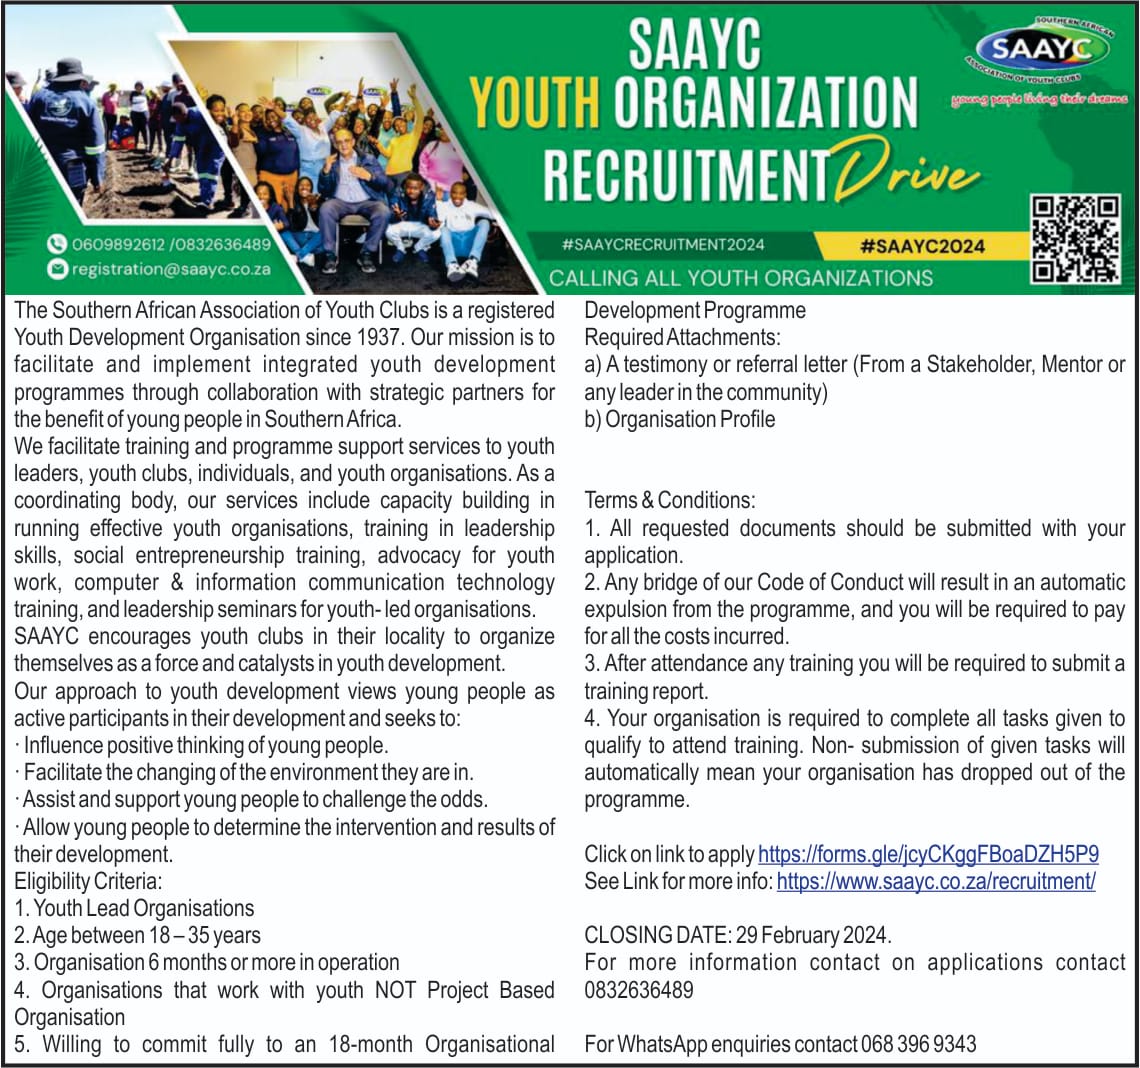 [MEDIA ALERT-NEWSPAPER AD] Don't miss out! Our recruitment campaign, by SAAYC, is in full swing and closing on February 29th, 2024. Organizations, seize the opportunity to join us on this exciting journey! See Link: issue.co.za #RecruitmentDrive #ISSUENEWPAPER